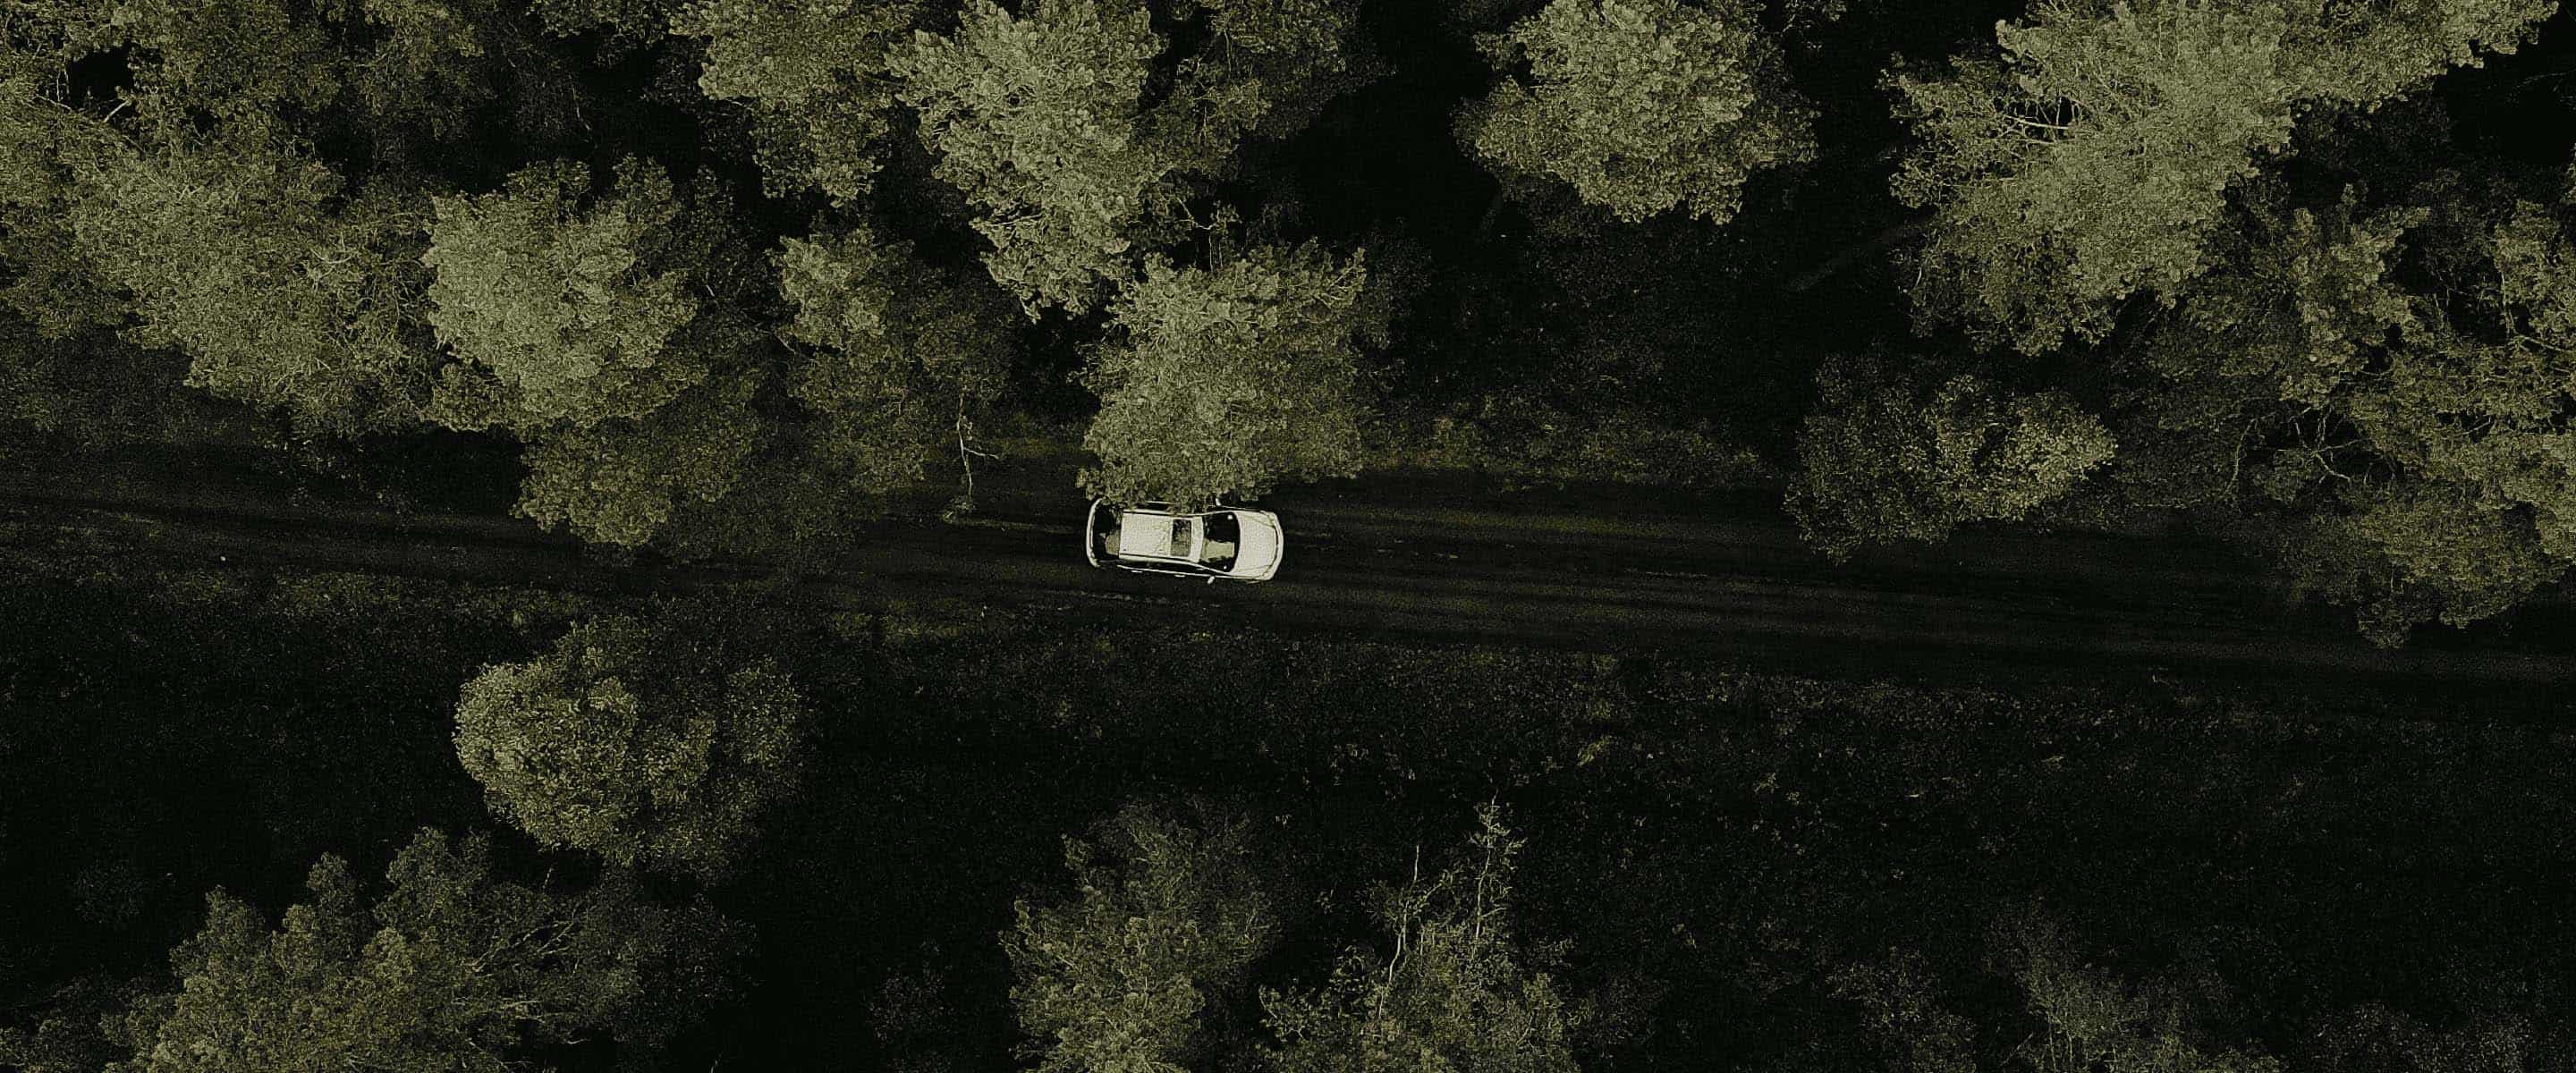 An aerial image of a vehicle driving down a forest road.